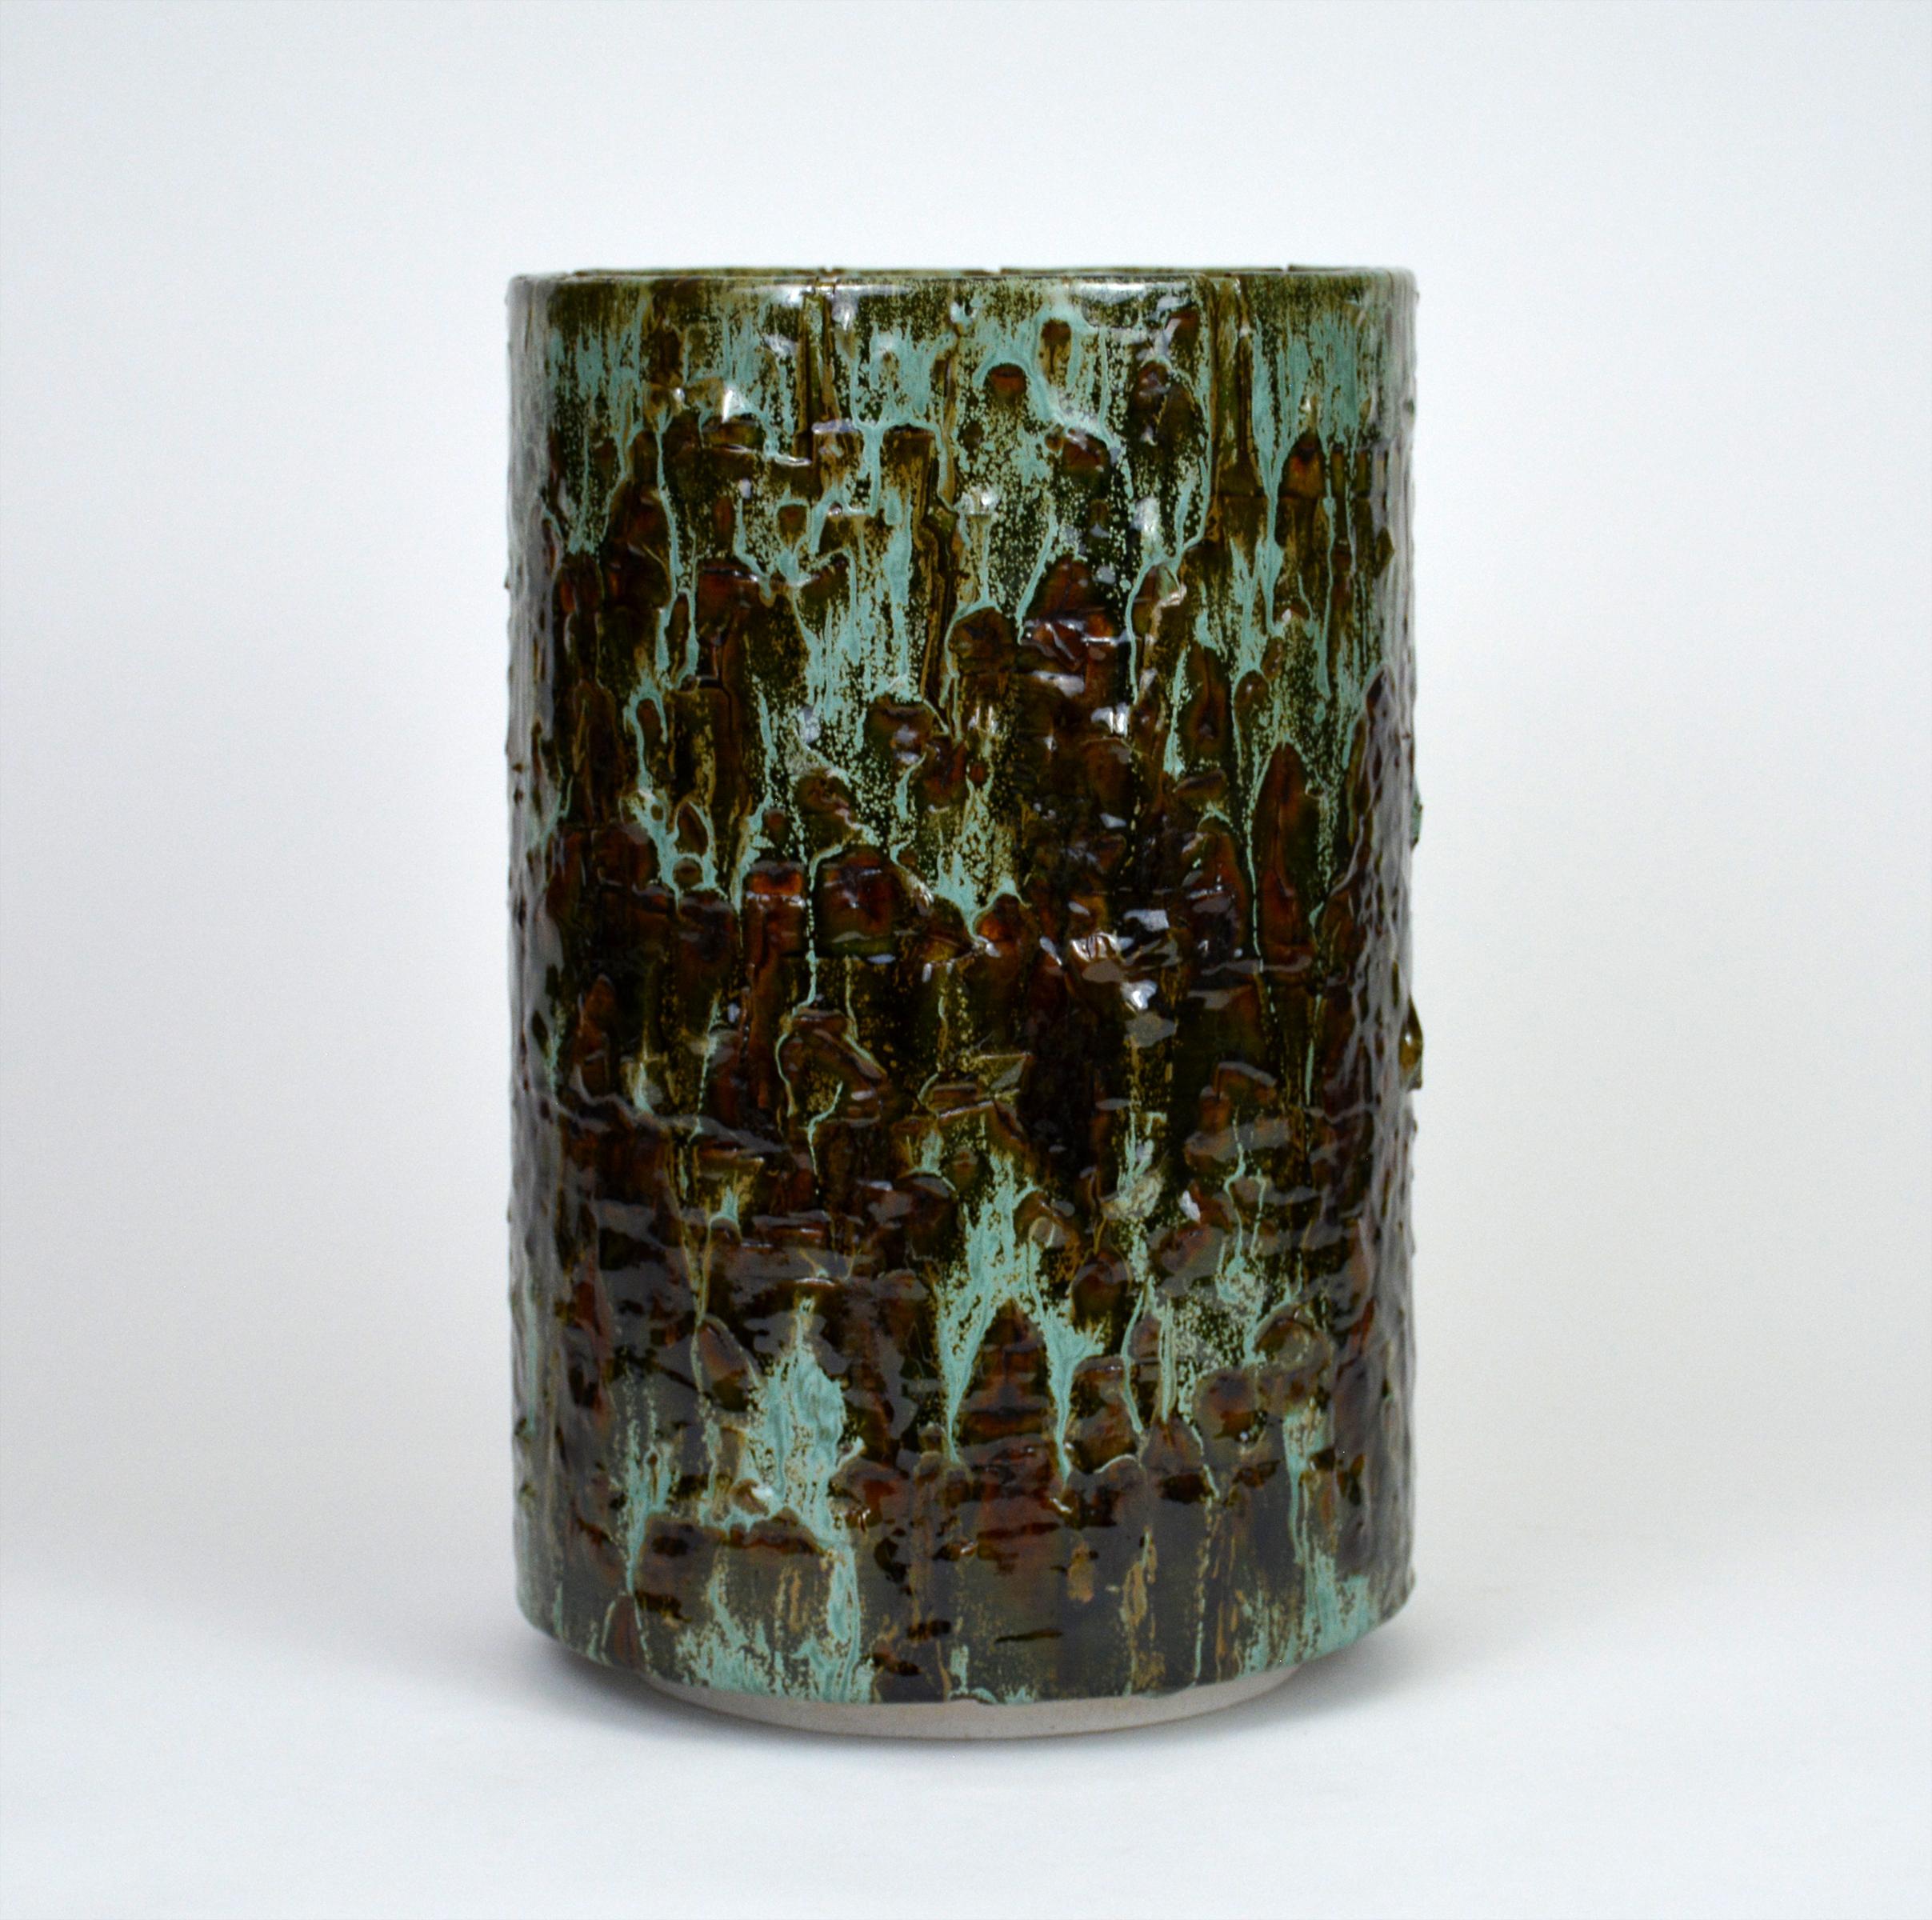 Glazed ceramic cylindrical sculpture by William Edwards
Hand built earthenware decorative vessel, fired multiple times to achieve a textured surface of random abstraction, in hues of green dripping over dark amber gloss glaze.

William received his